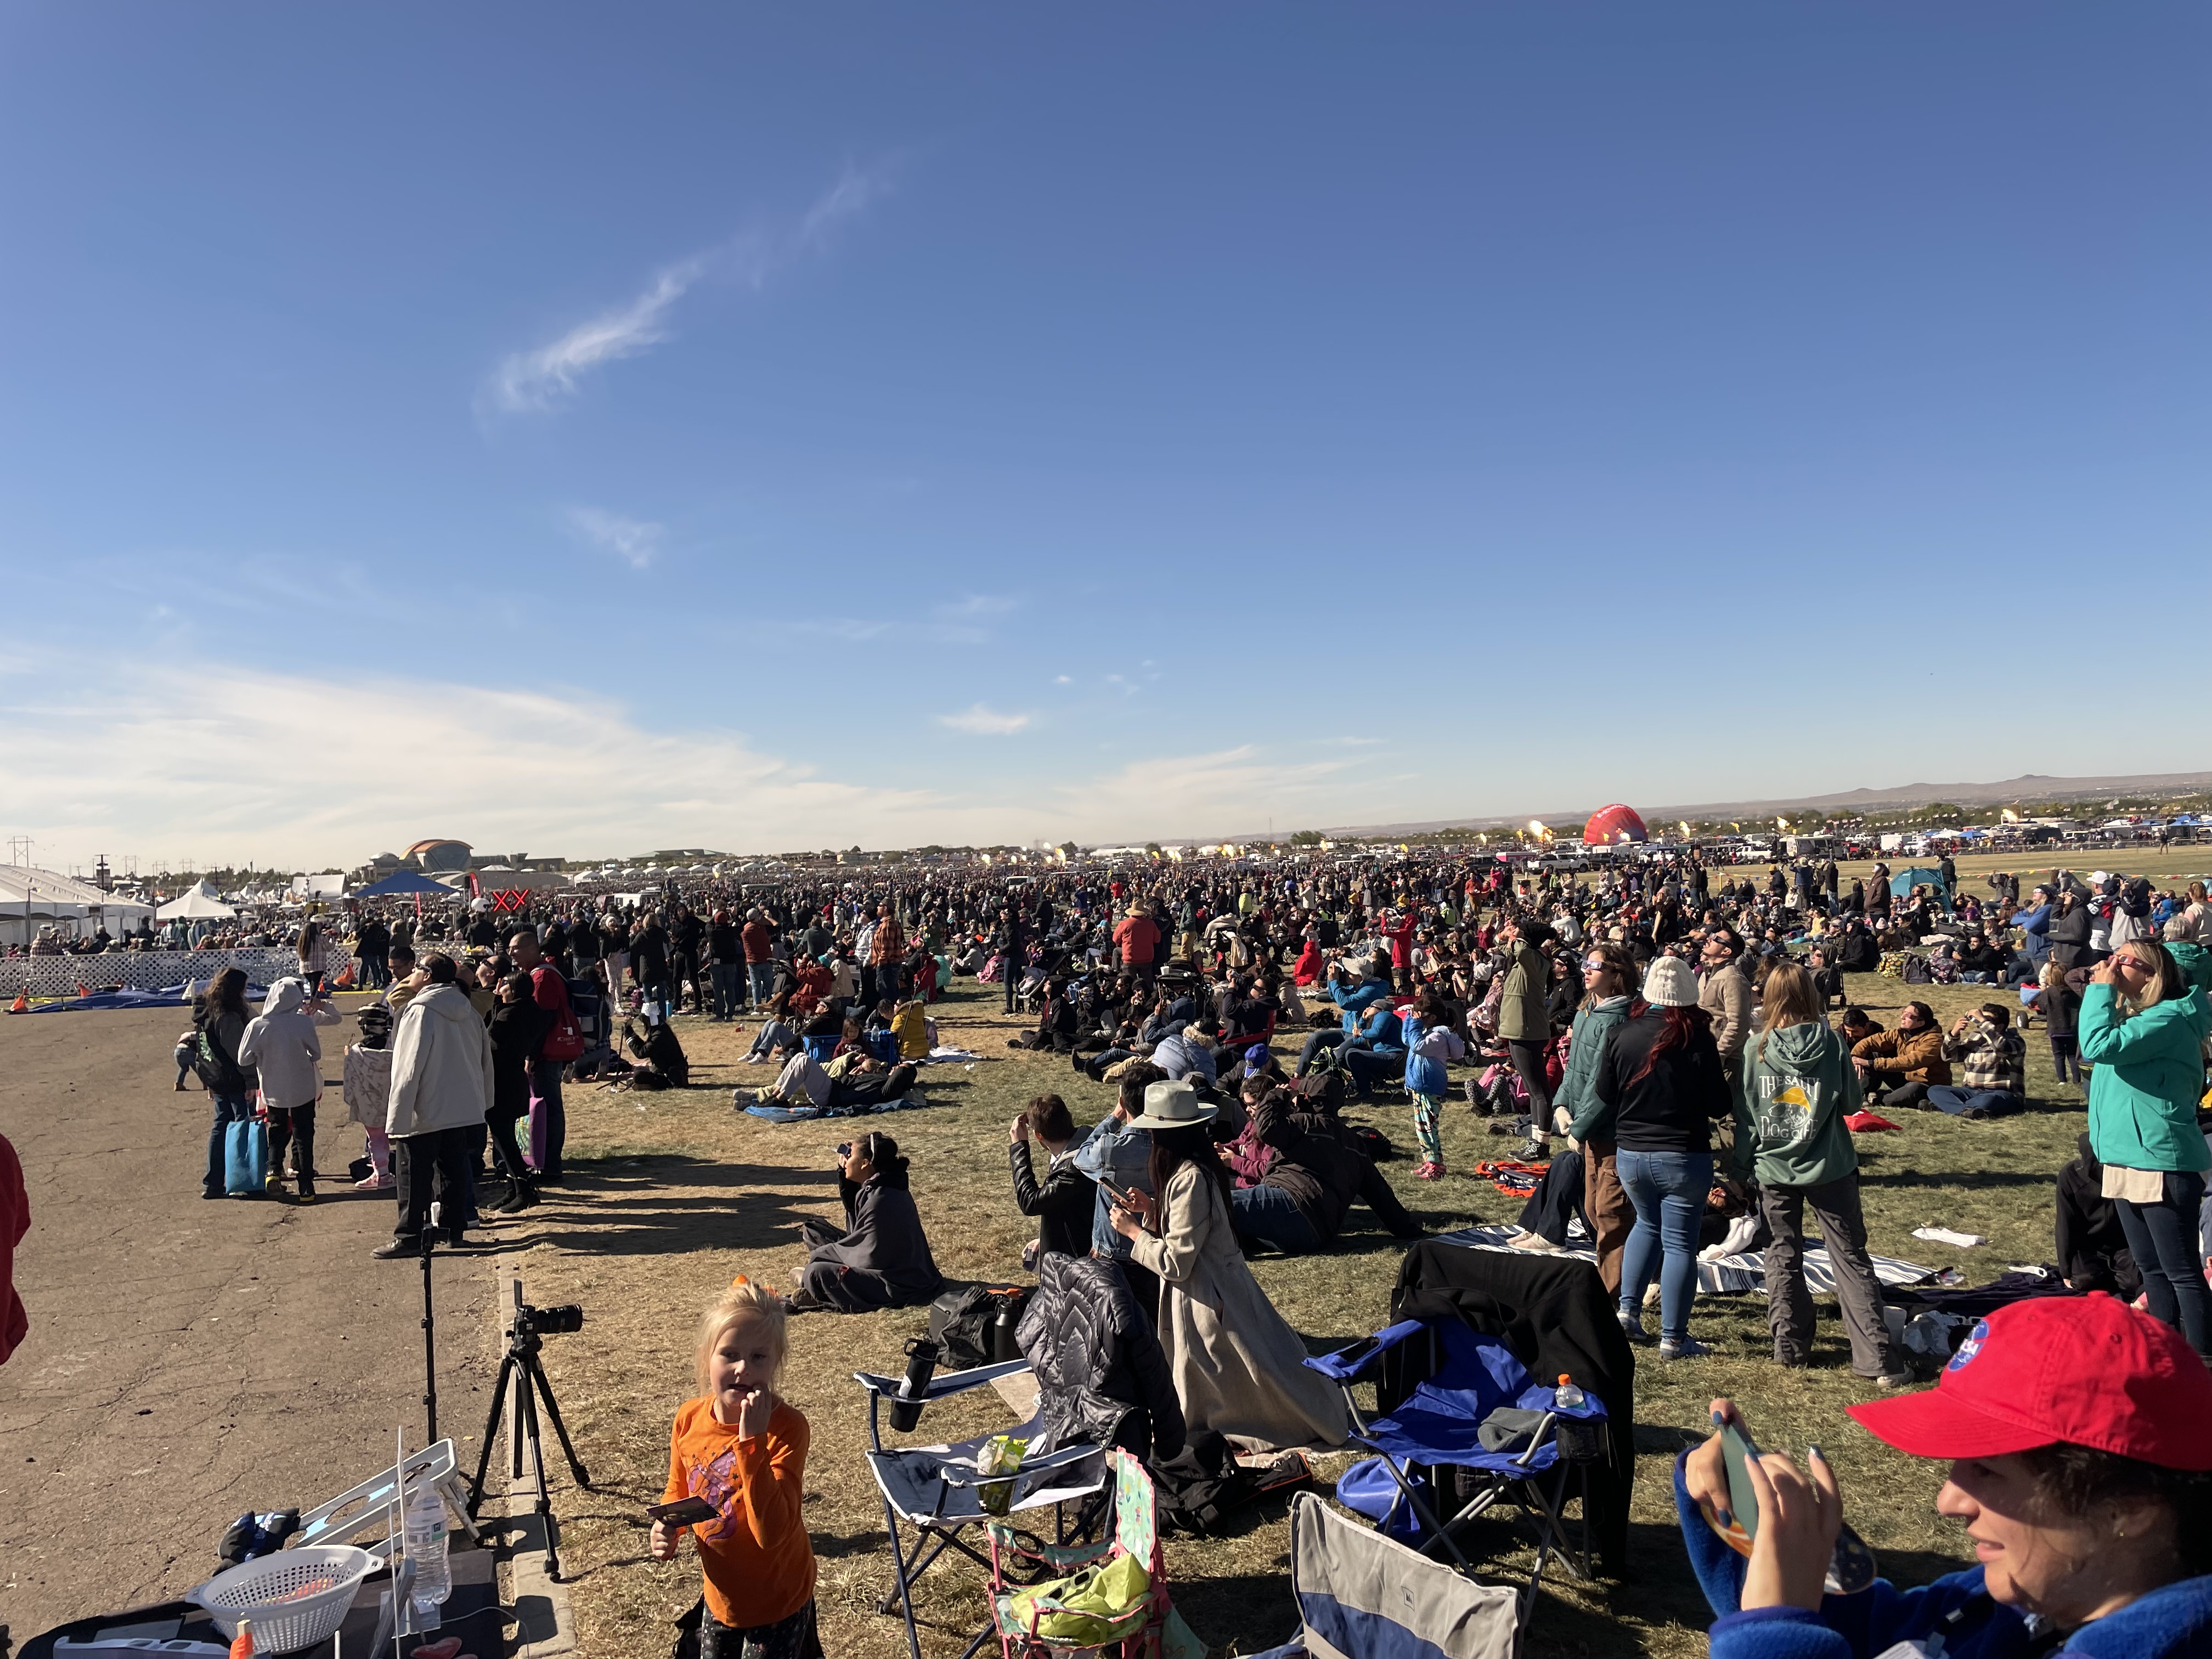 On a dry and dusty open space, a huge crowd of people has gathered, both standing and sitting, many looking up at the sky. The sky above is blue, with some wispy clouds down by the horizon. On the far left some white tent roofs are visible. In the distance on the right we can see a partially inflated red hot air balloon, resting on the ground.